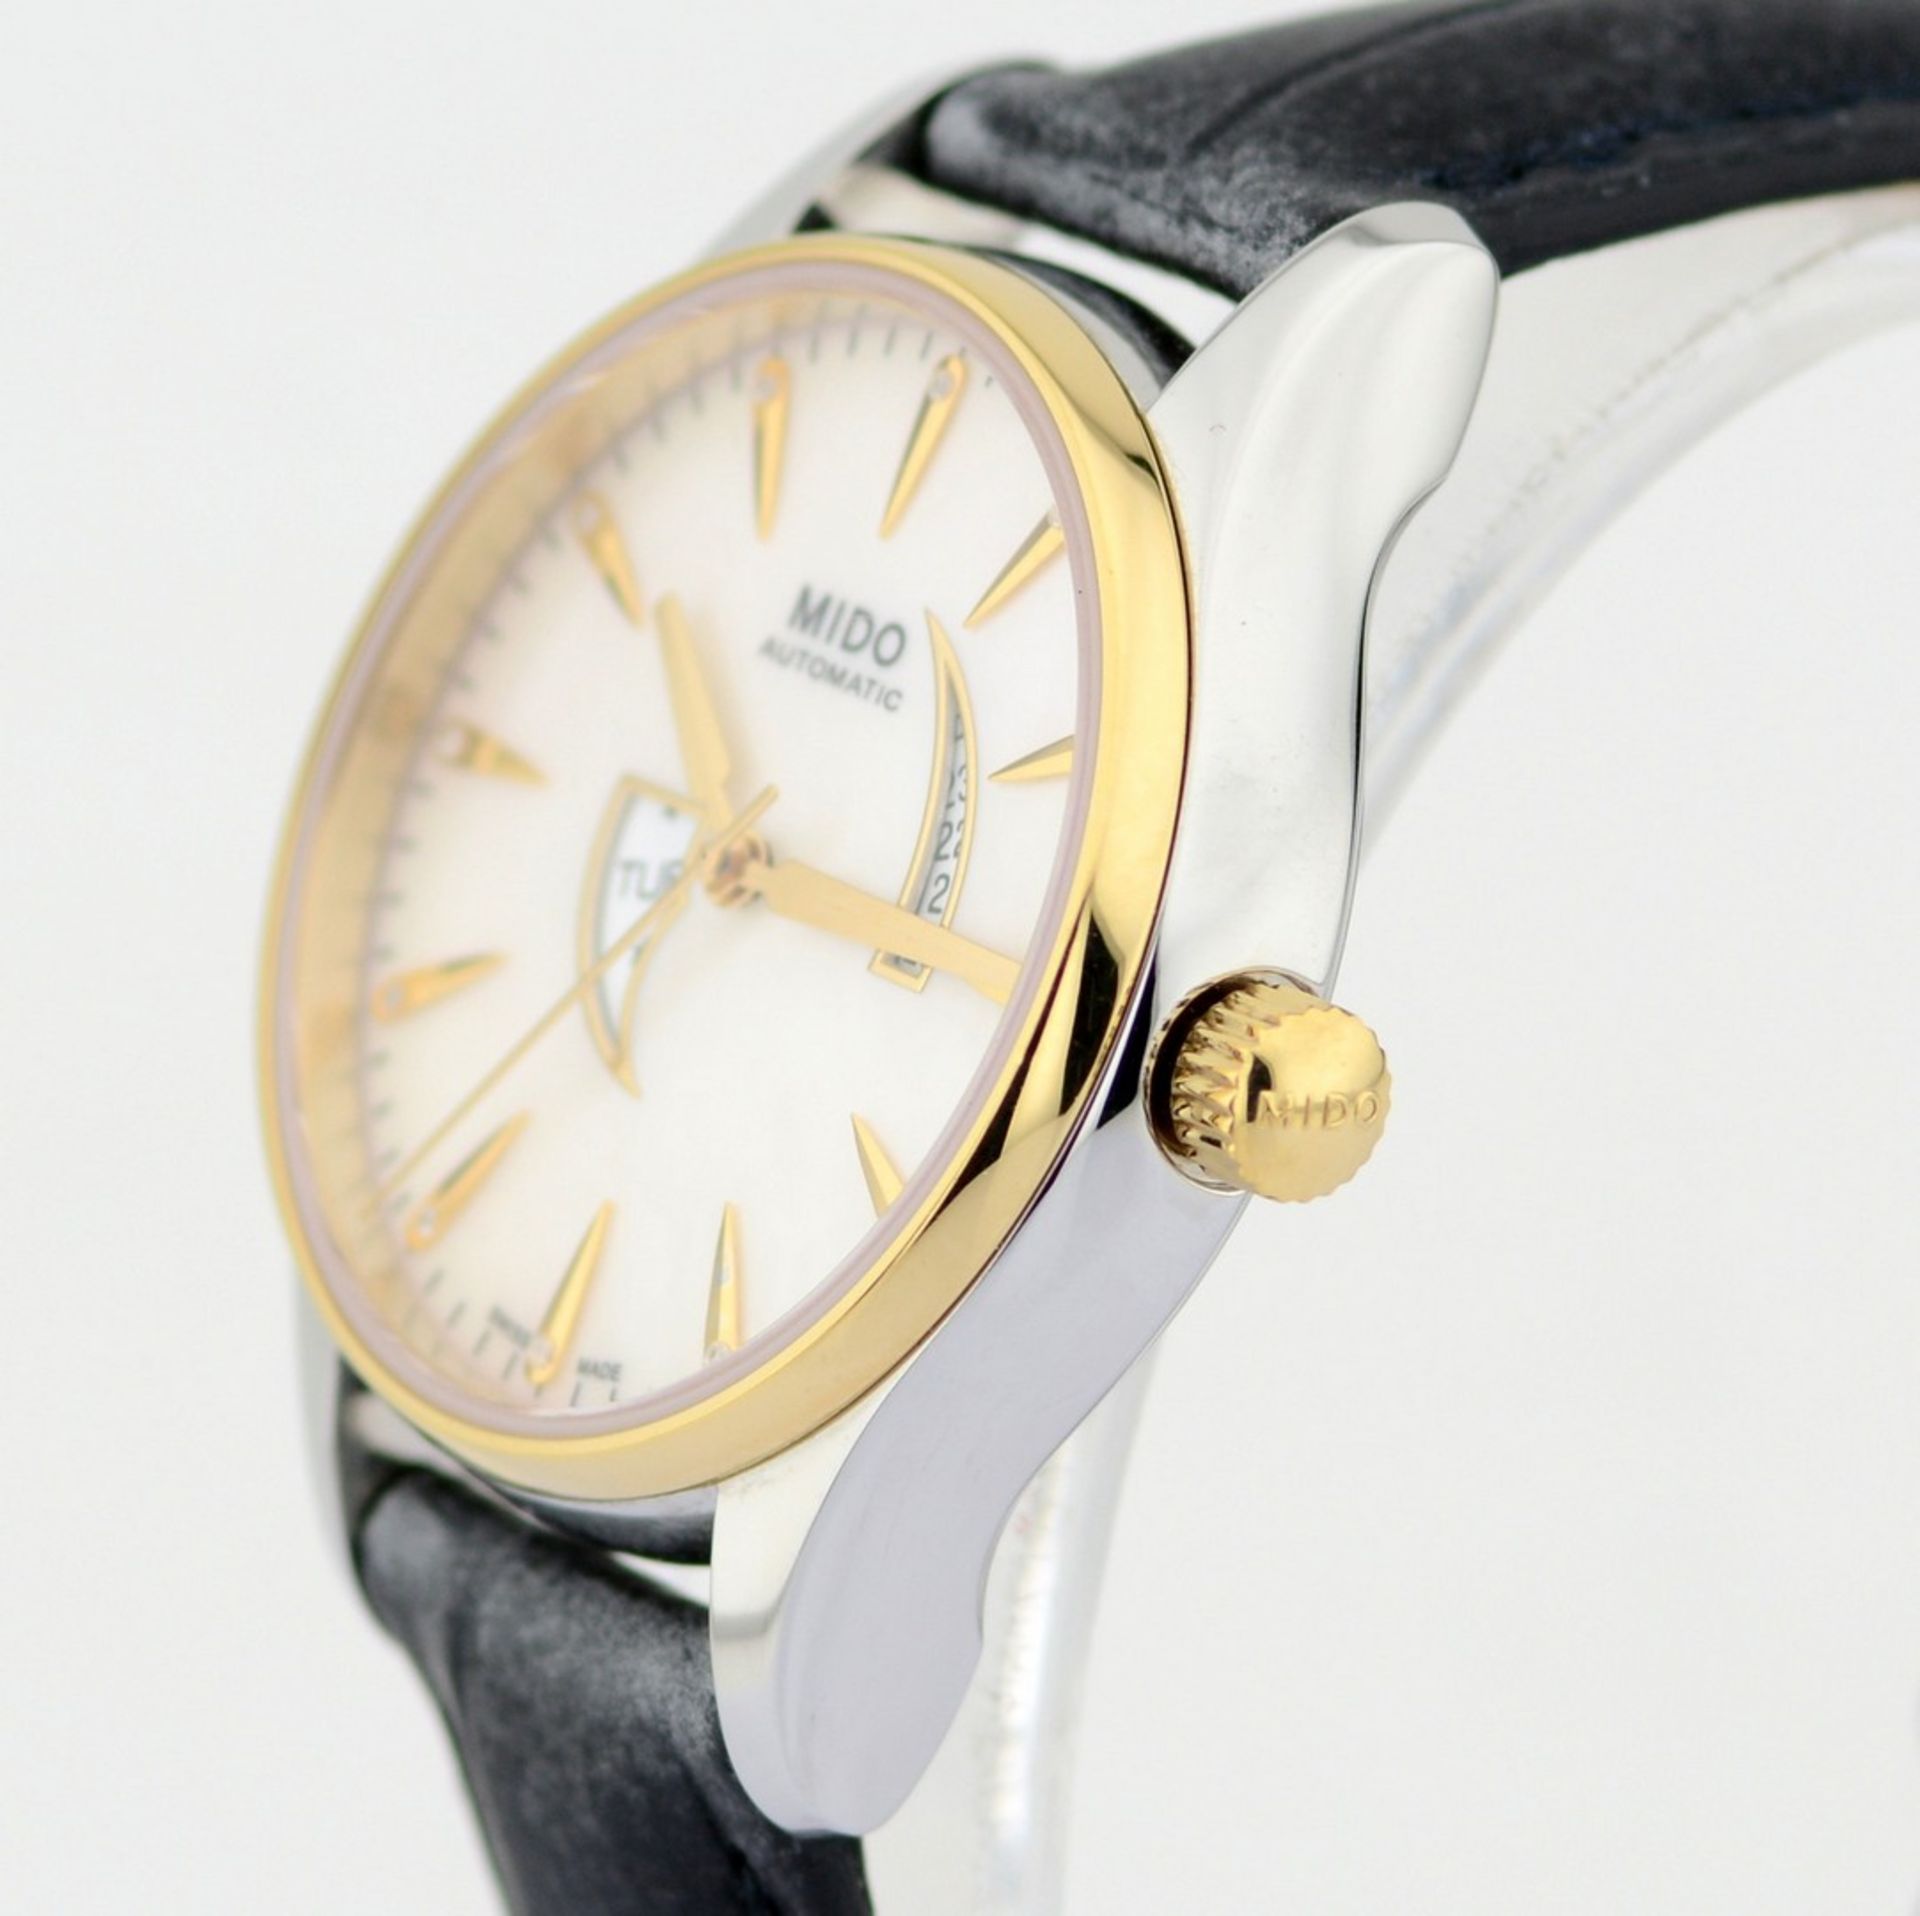 Mido / Belluna Mother of Pearl Day - Date Automatic - Lady's Gold/Steel Wrist Watch - Image 5 of 12